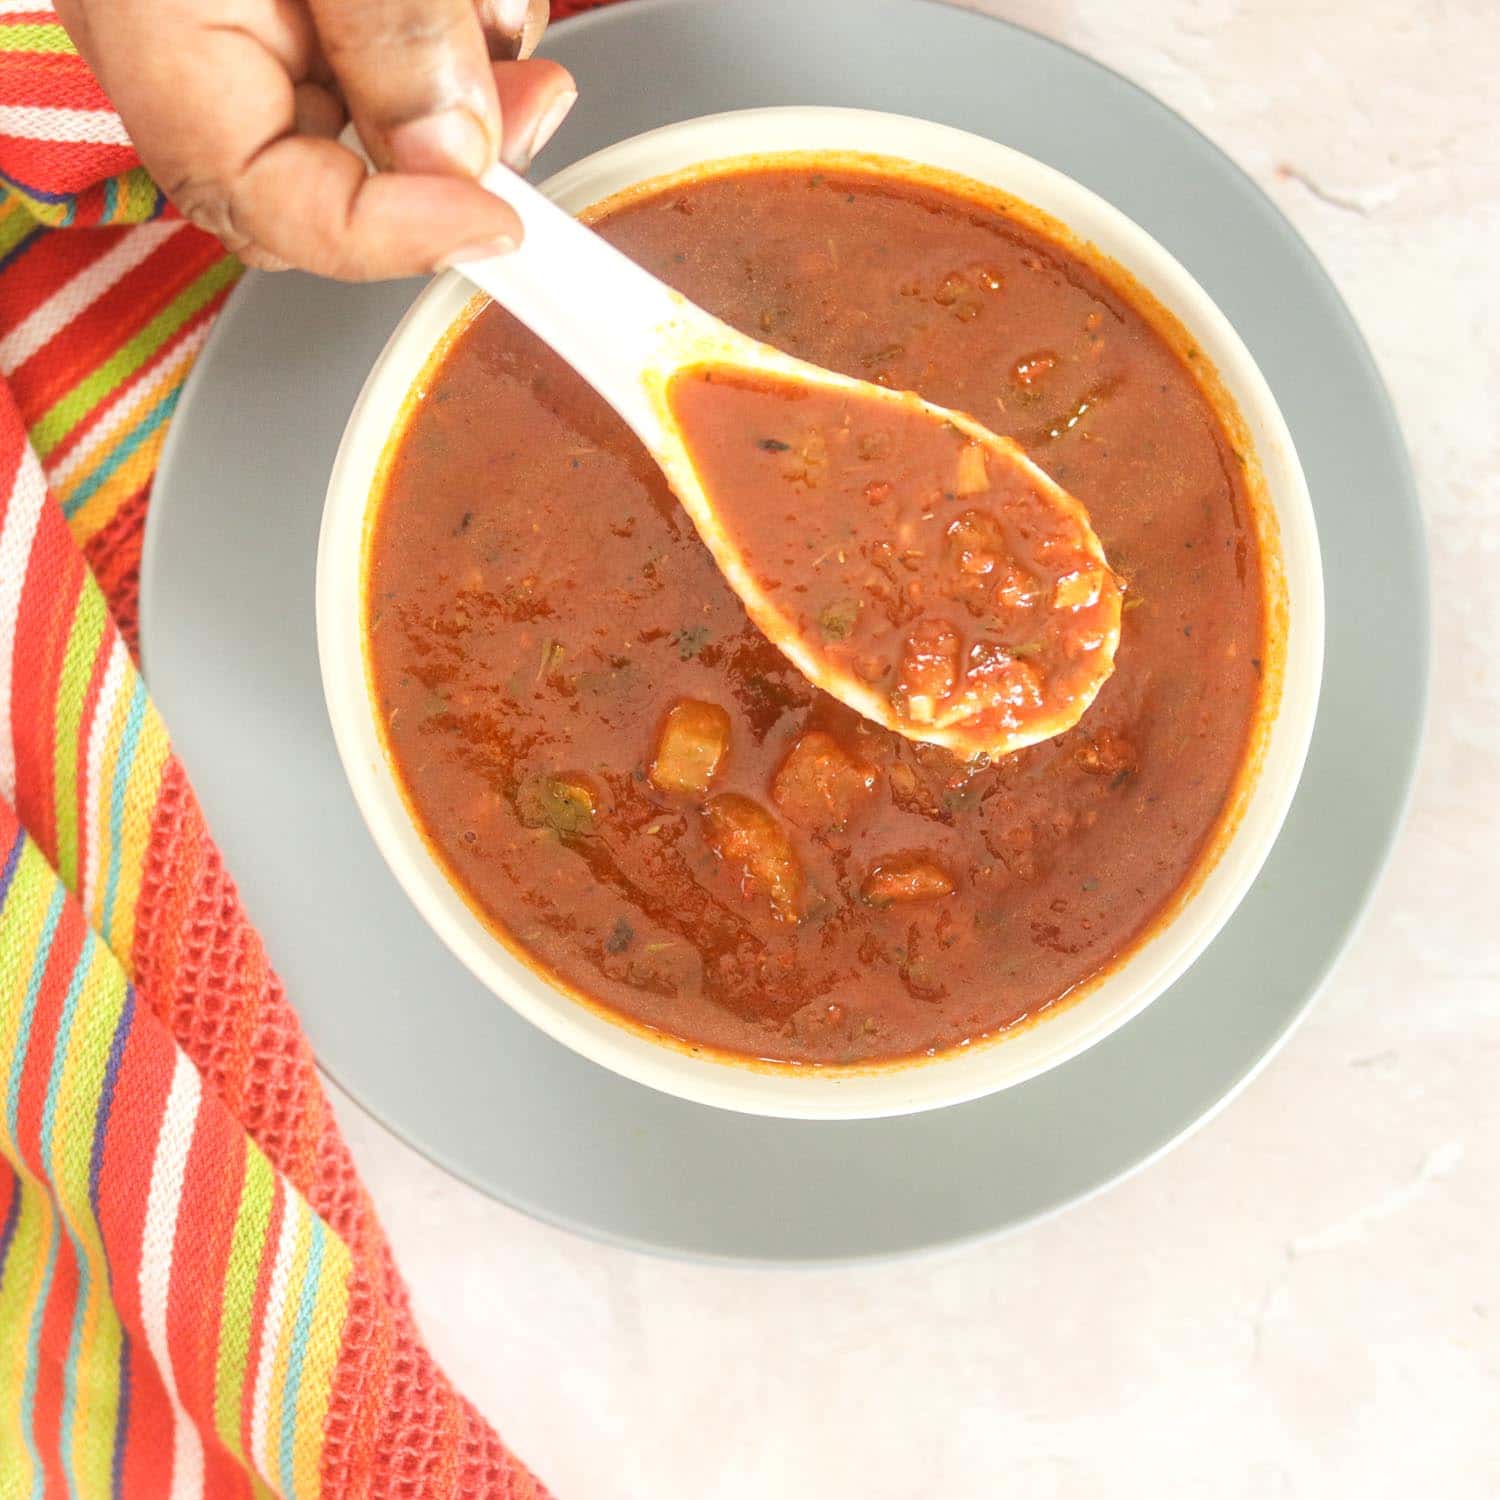 Creole Sauce in bowl with spoon and kitchen towel